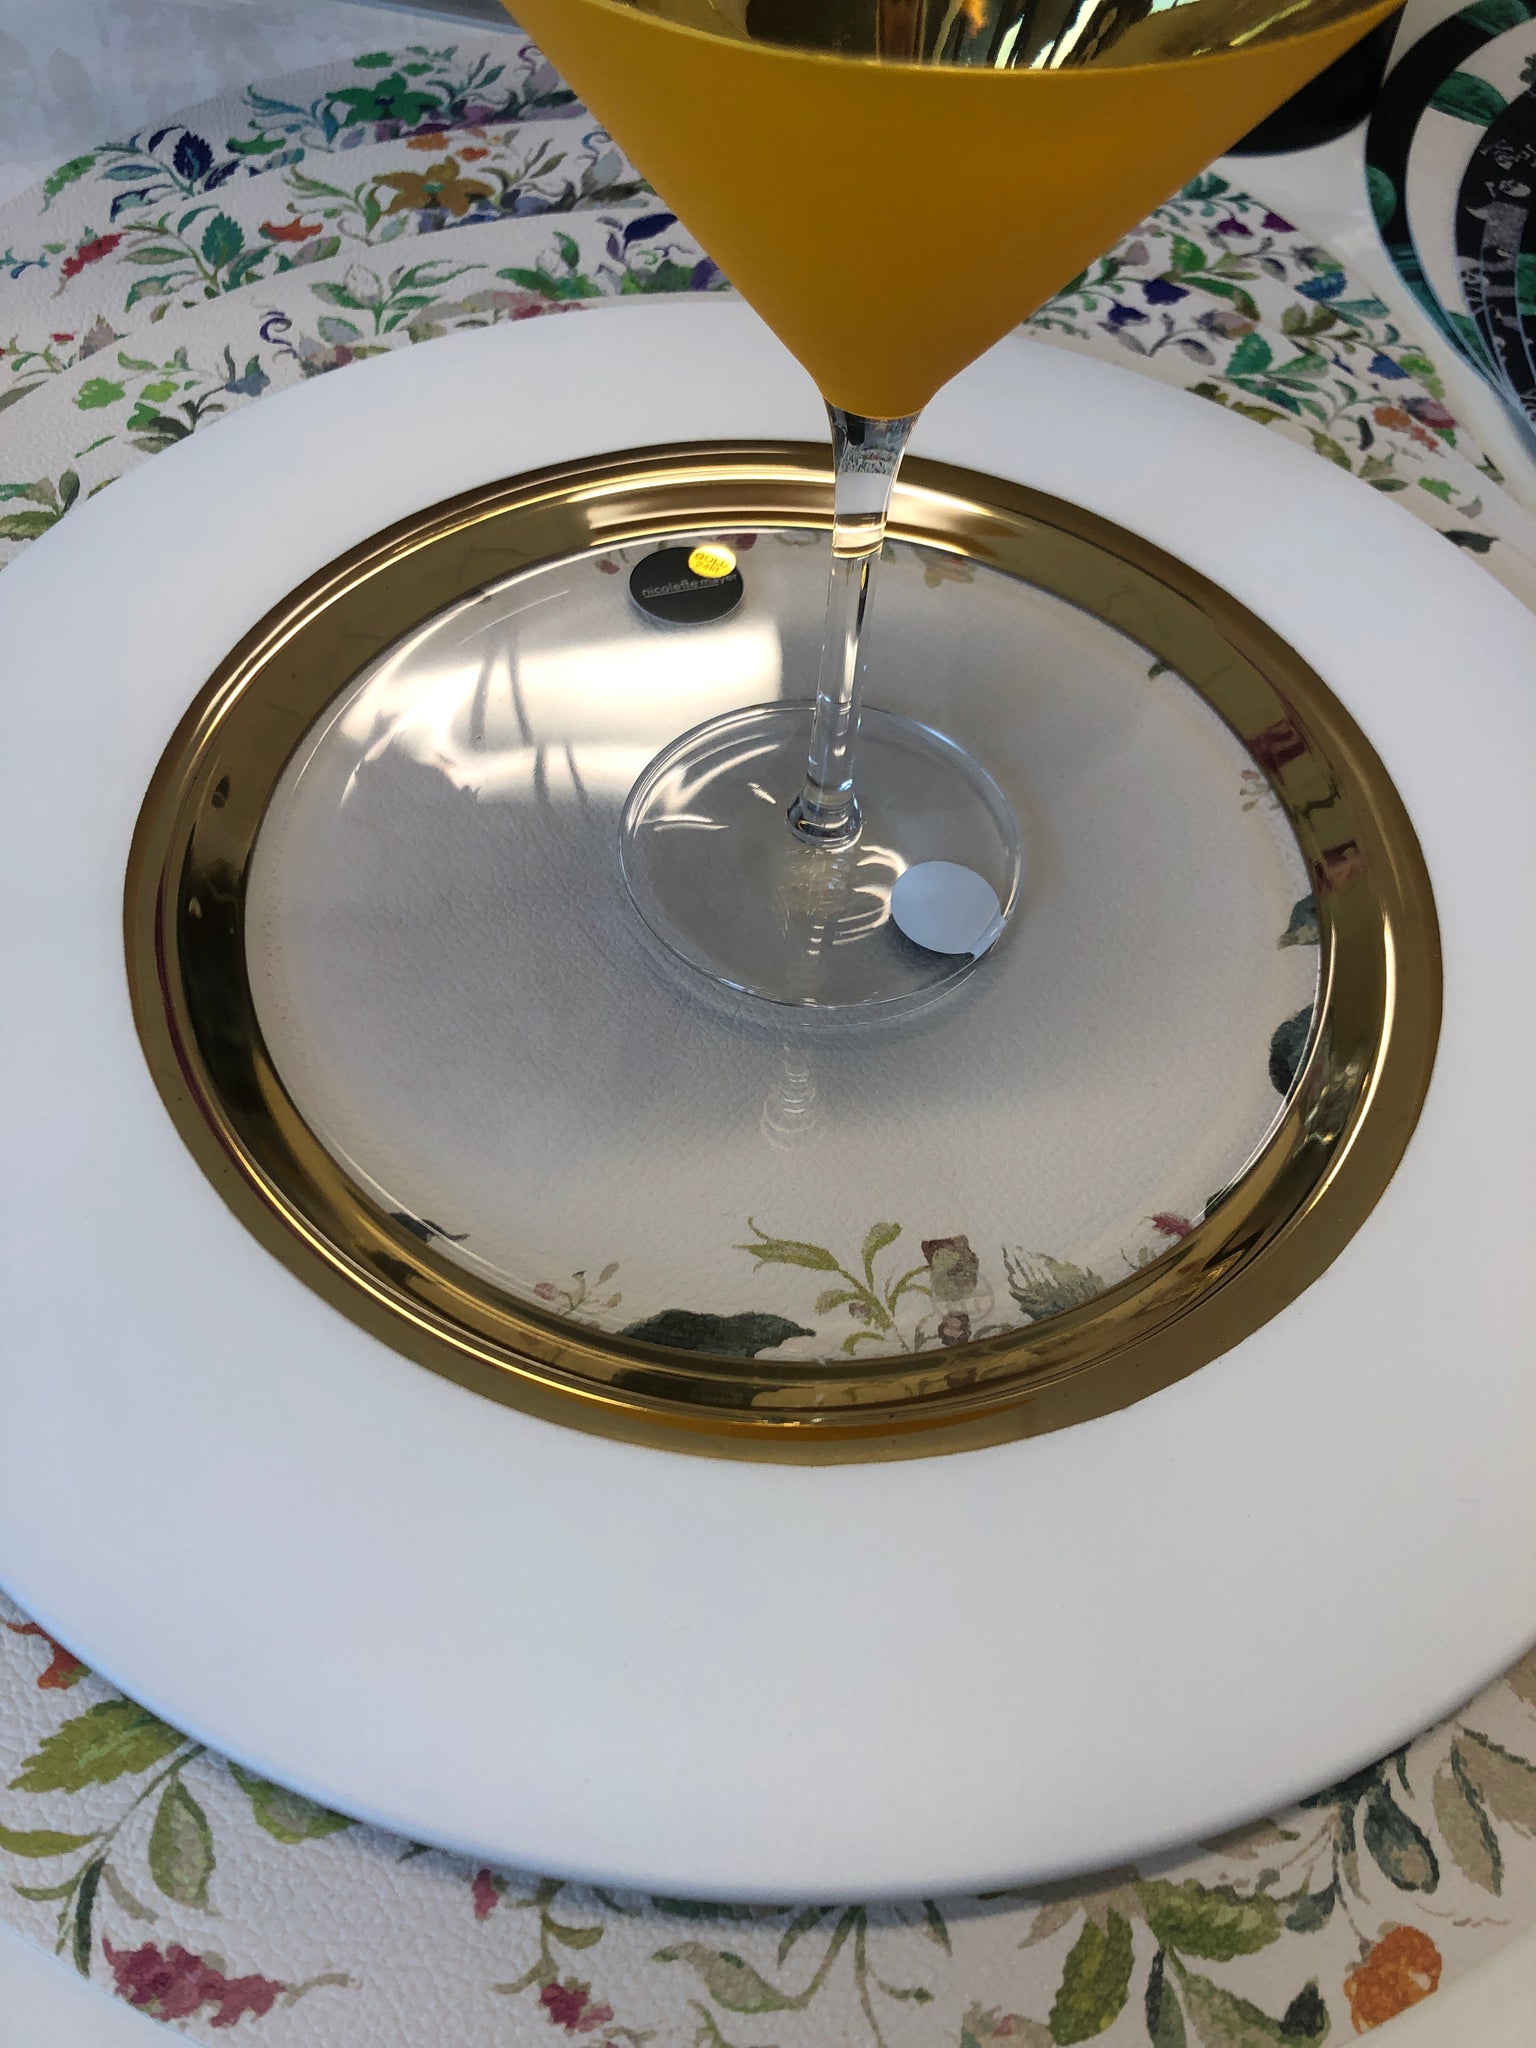 ORO Collection by Nicolette Mayer in White with Mustard Martini and Wreath Placemat